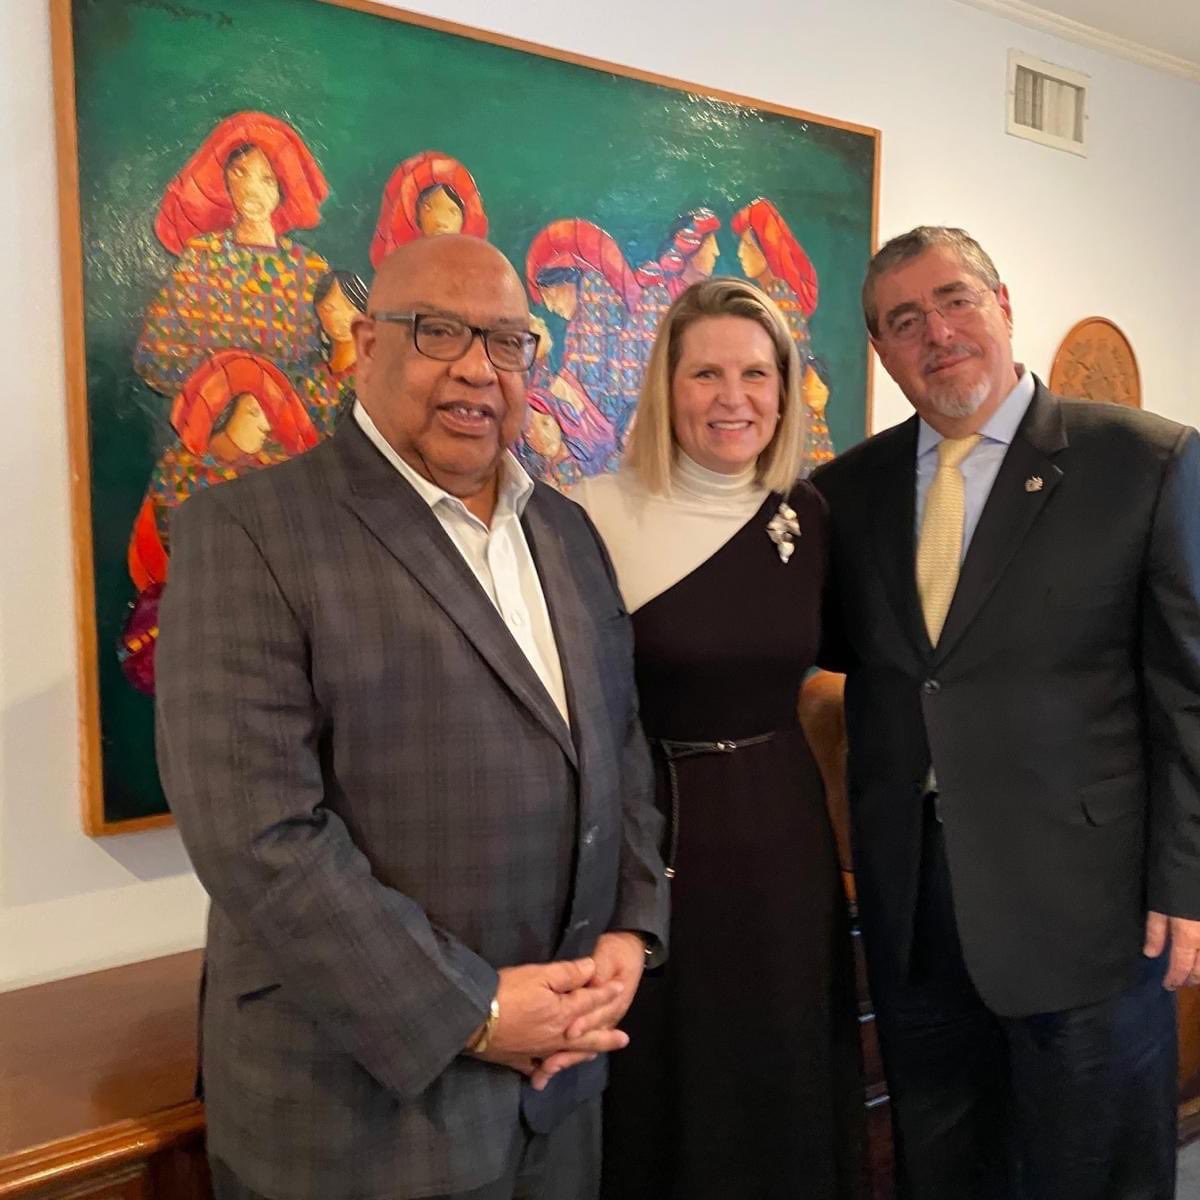 @AFLCIO @LizShuler @STRedmond met President Arévalo of #Guatemala to discuss critical role unions play in protecting democracy & fighting corruption in both countries. Violence against unions in Guatemala must be ended and #DecentWork created for all workers.